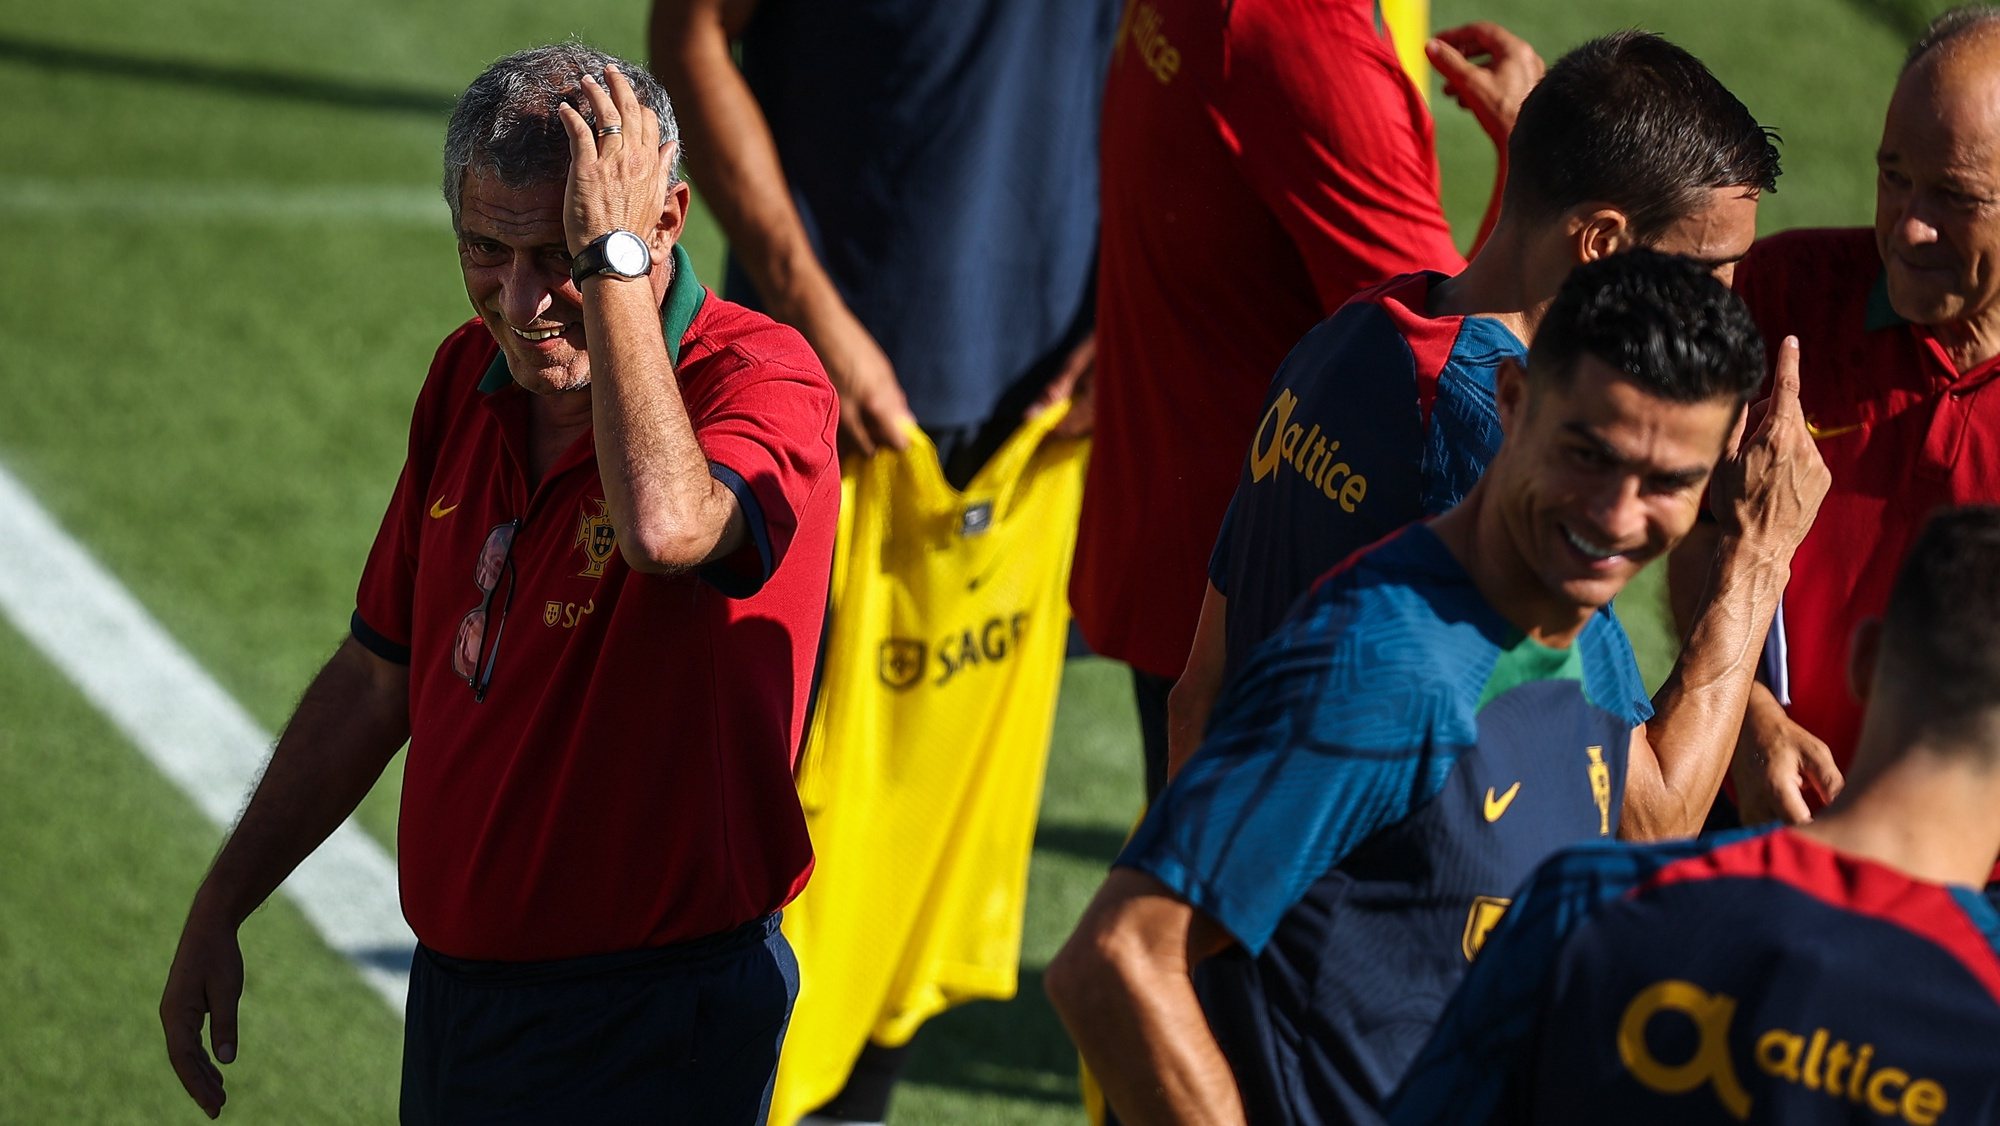 Portugal soccer team head coach Fernando Santos (L) during a training session at Cidade do Futebol in Oeiras, outskirts of Lisbon, Portugal, 22 September 2022. Portugal will play against the Czechia Republic on 24th of September in Prague and Spain on the 27th September in Portugal northern city of Braga for the upcoming UEFA Nations League. RODRIGO ANTUNES/LUSA